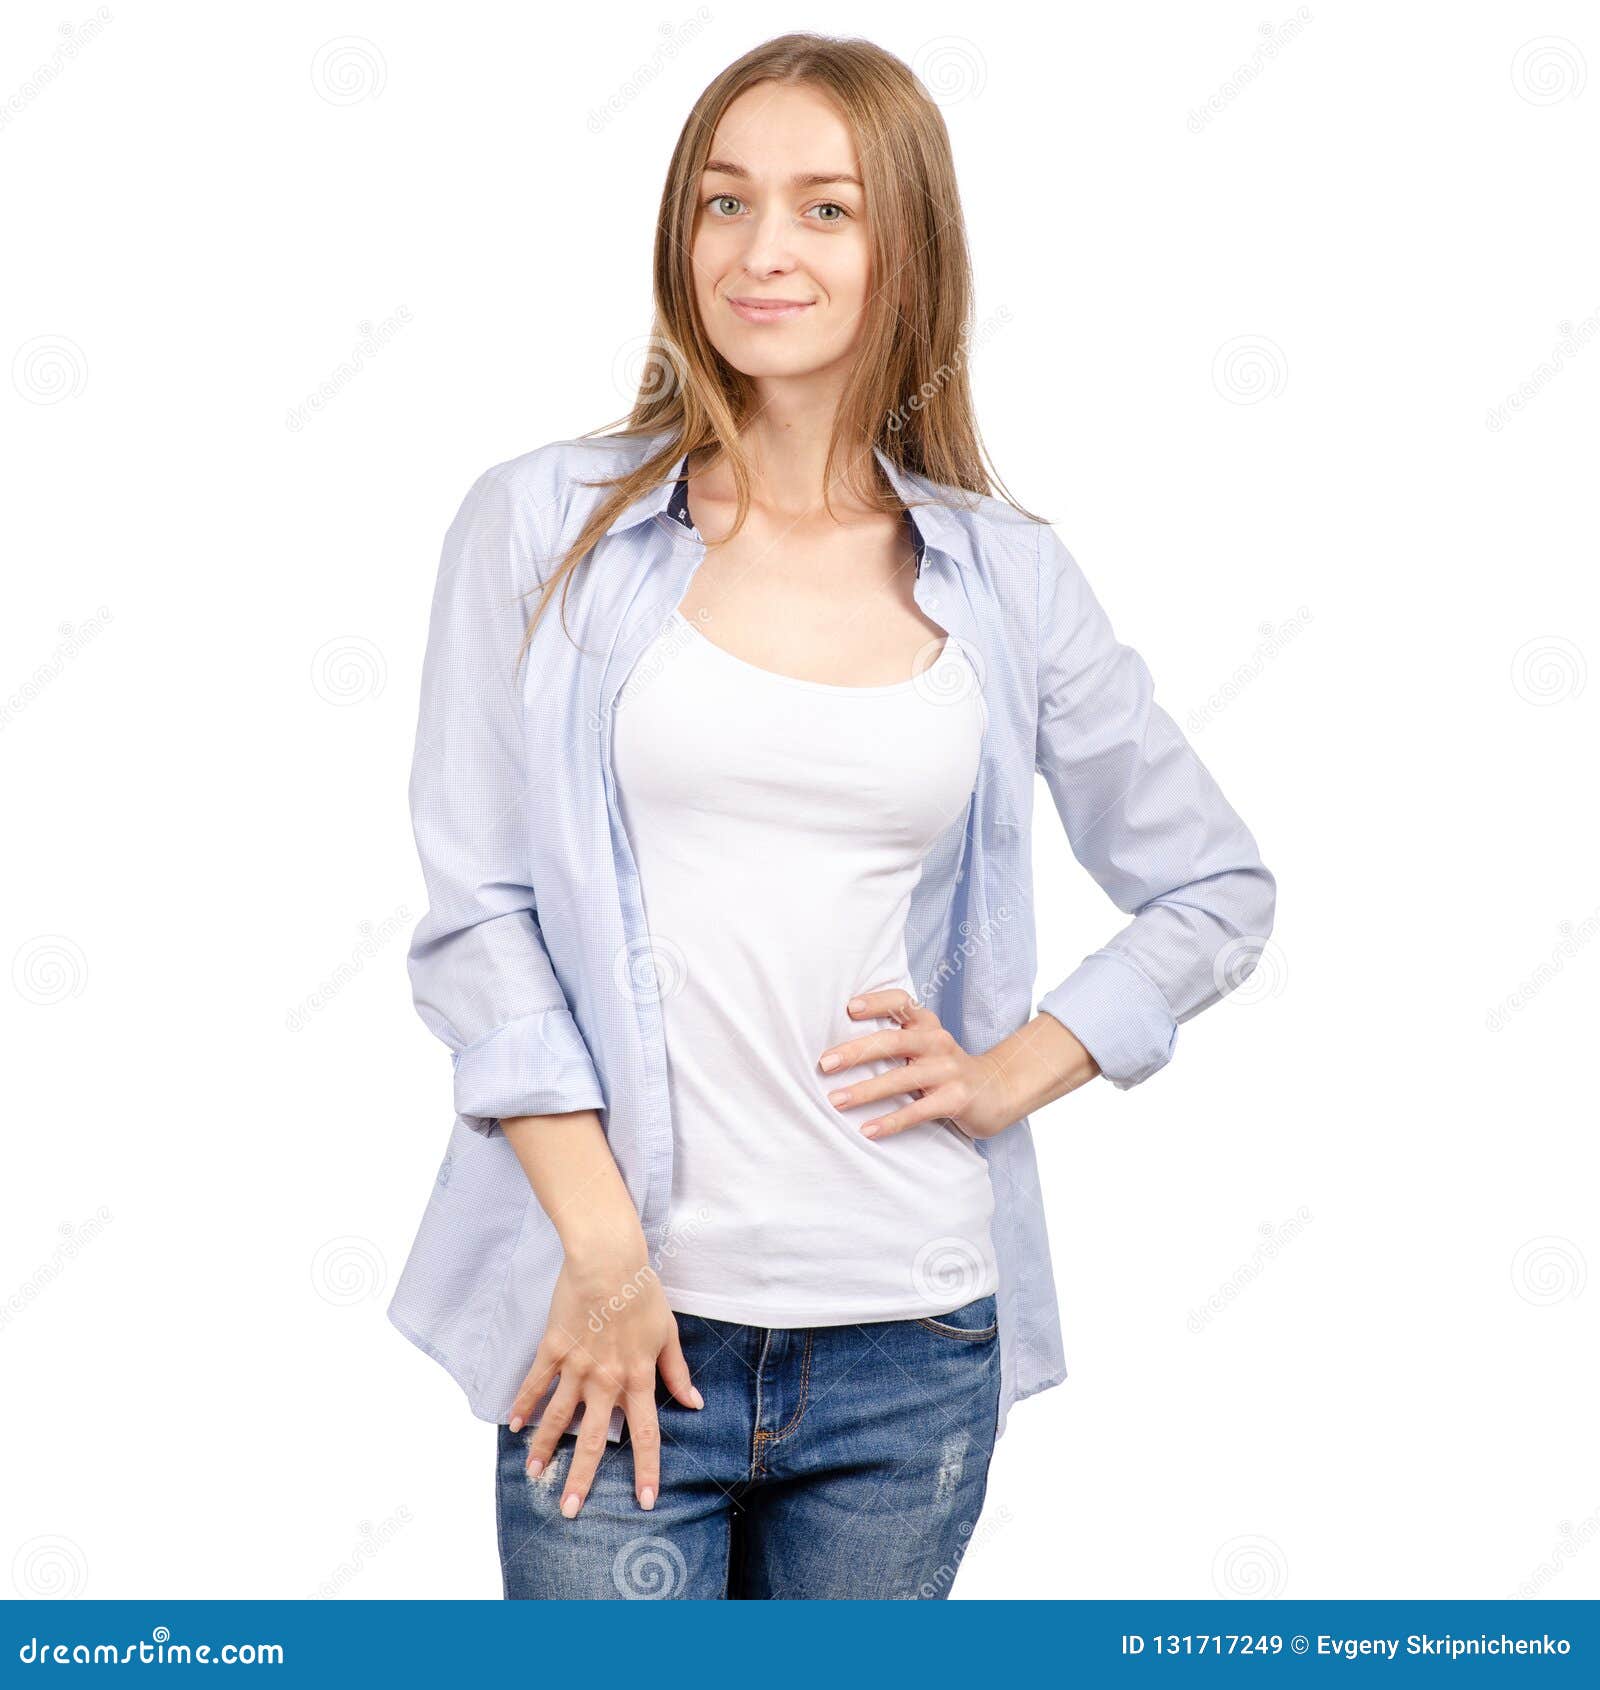 Beautiful Young Woman in Shirt and Jeans Smiling Stock Image - Image of ...